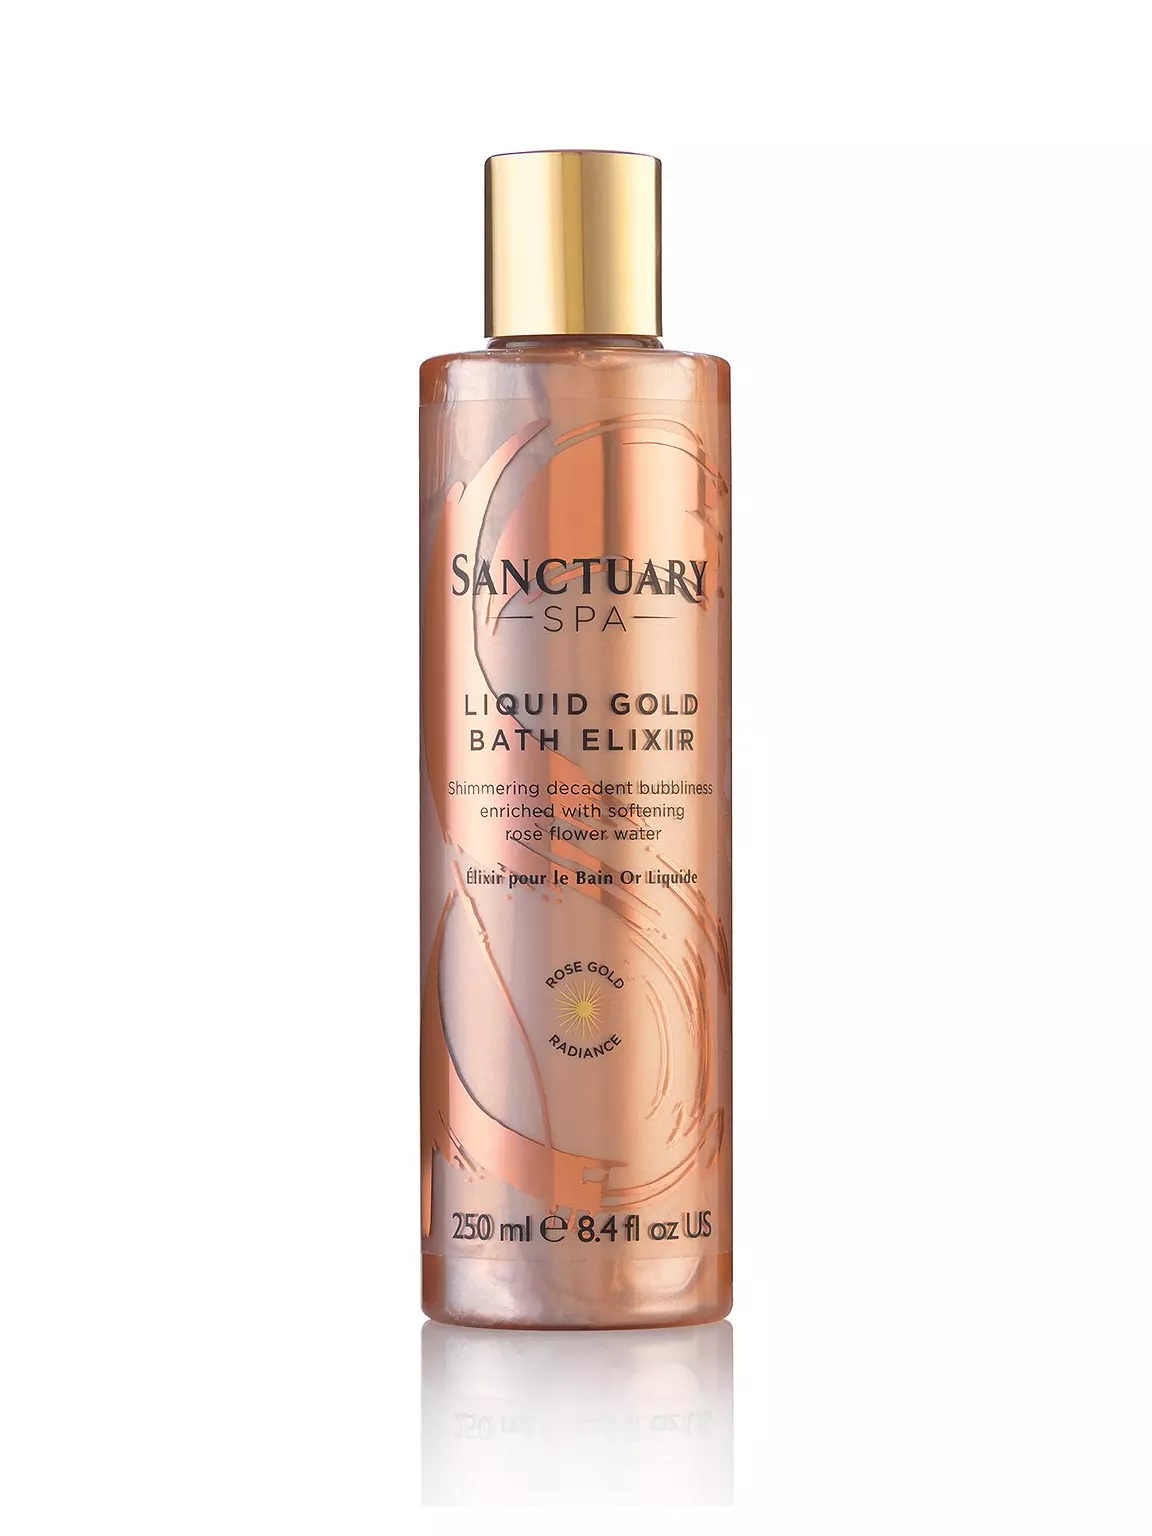 Sanctuary Spa liquid gold elixir, £12 from very.co.uk